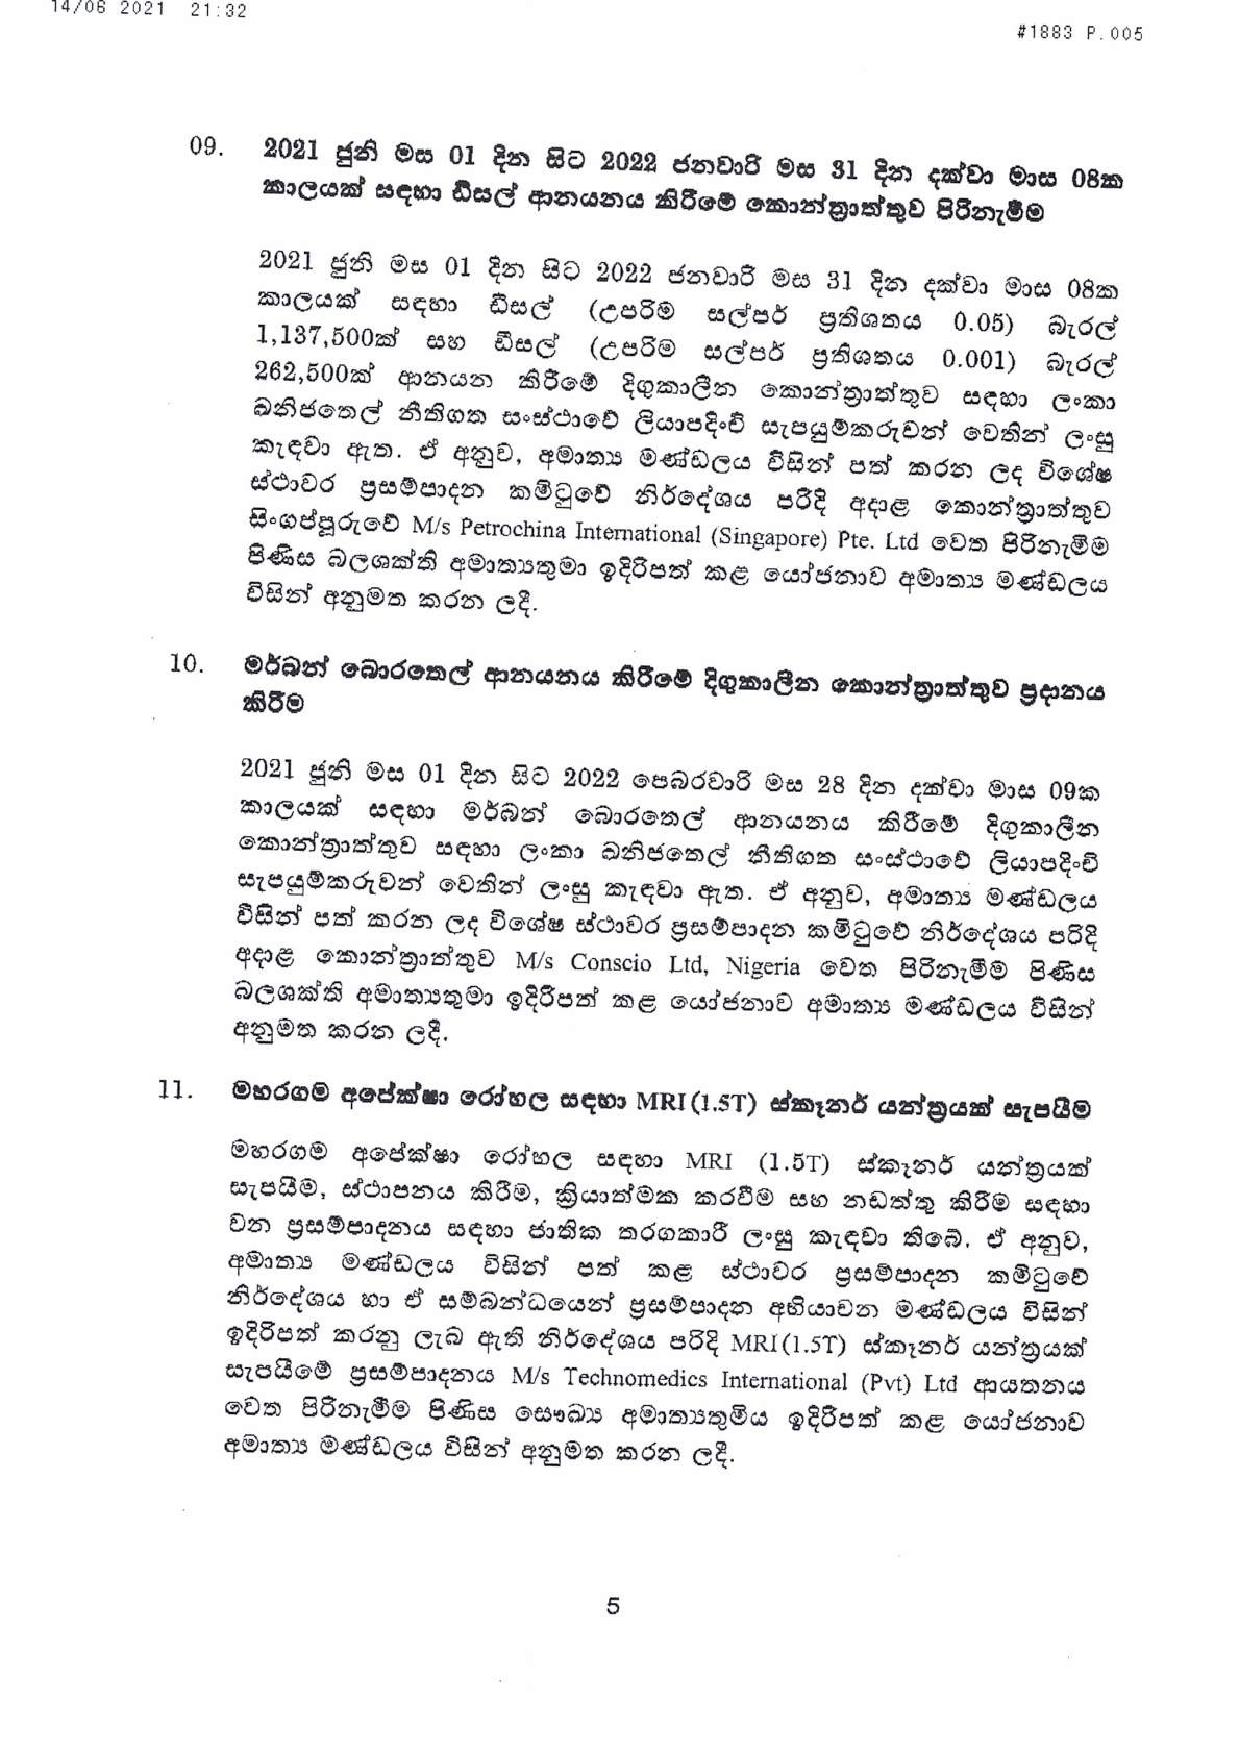 Cabinet Decisions on 14.06.2021 page 005